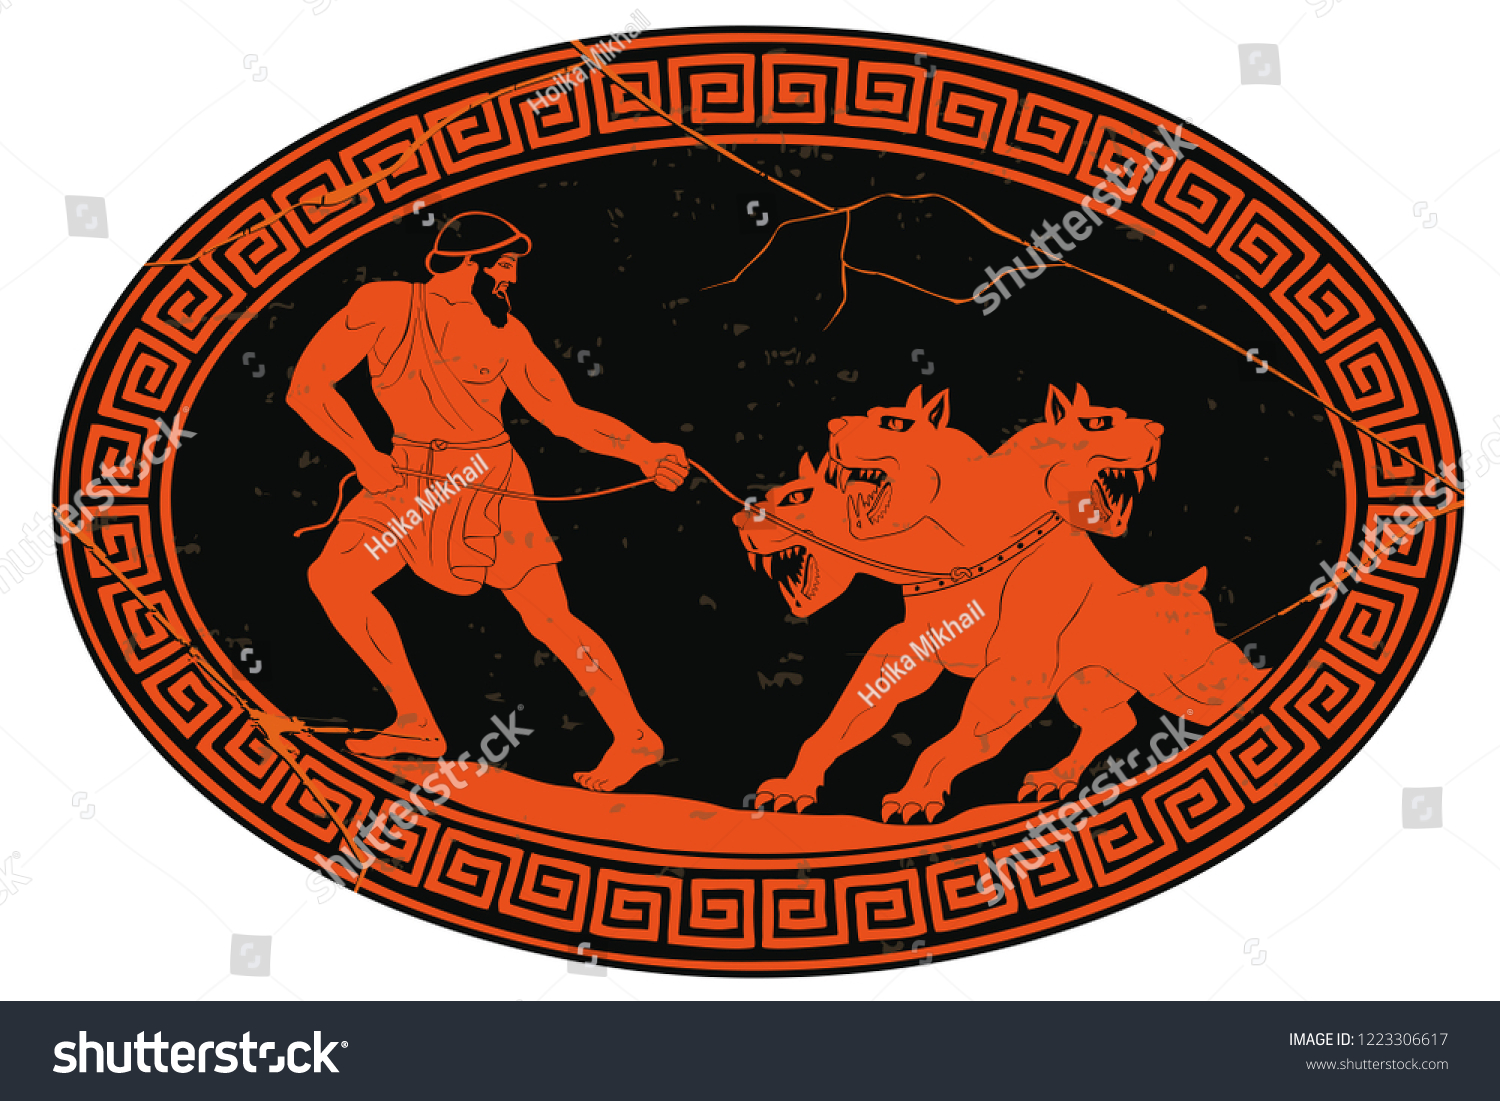 SVG of Hercules abducts Cerberus from Hell. Oval medallion isolated on a white background. svg